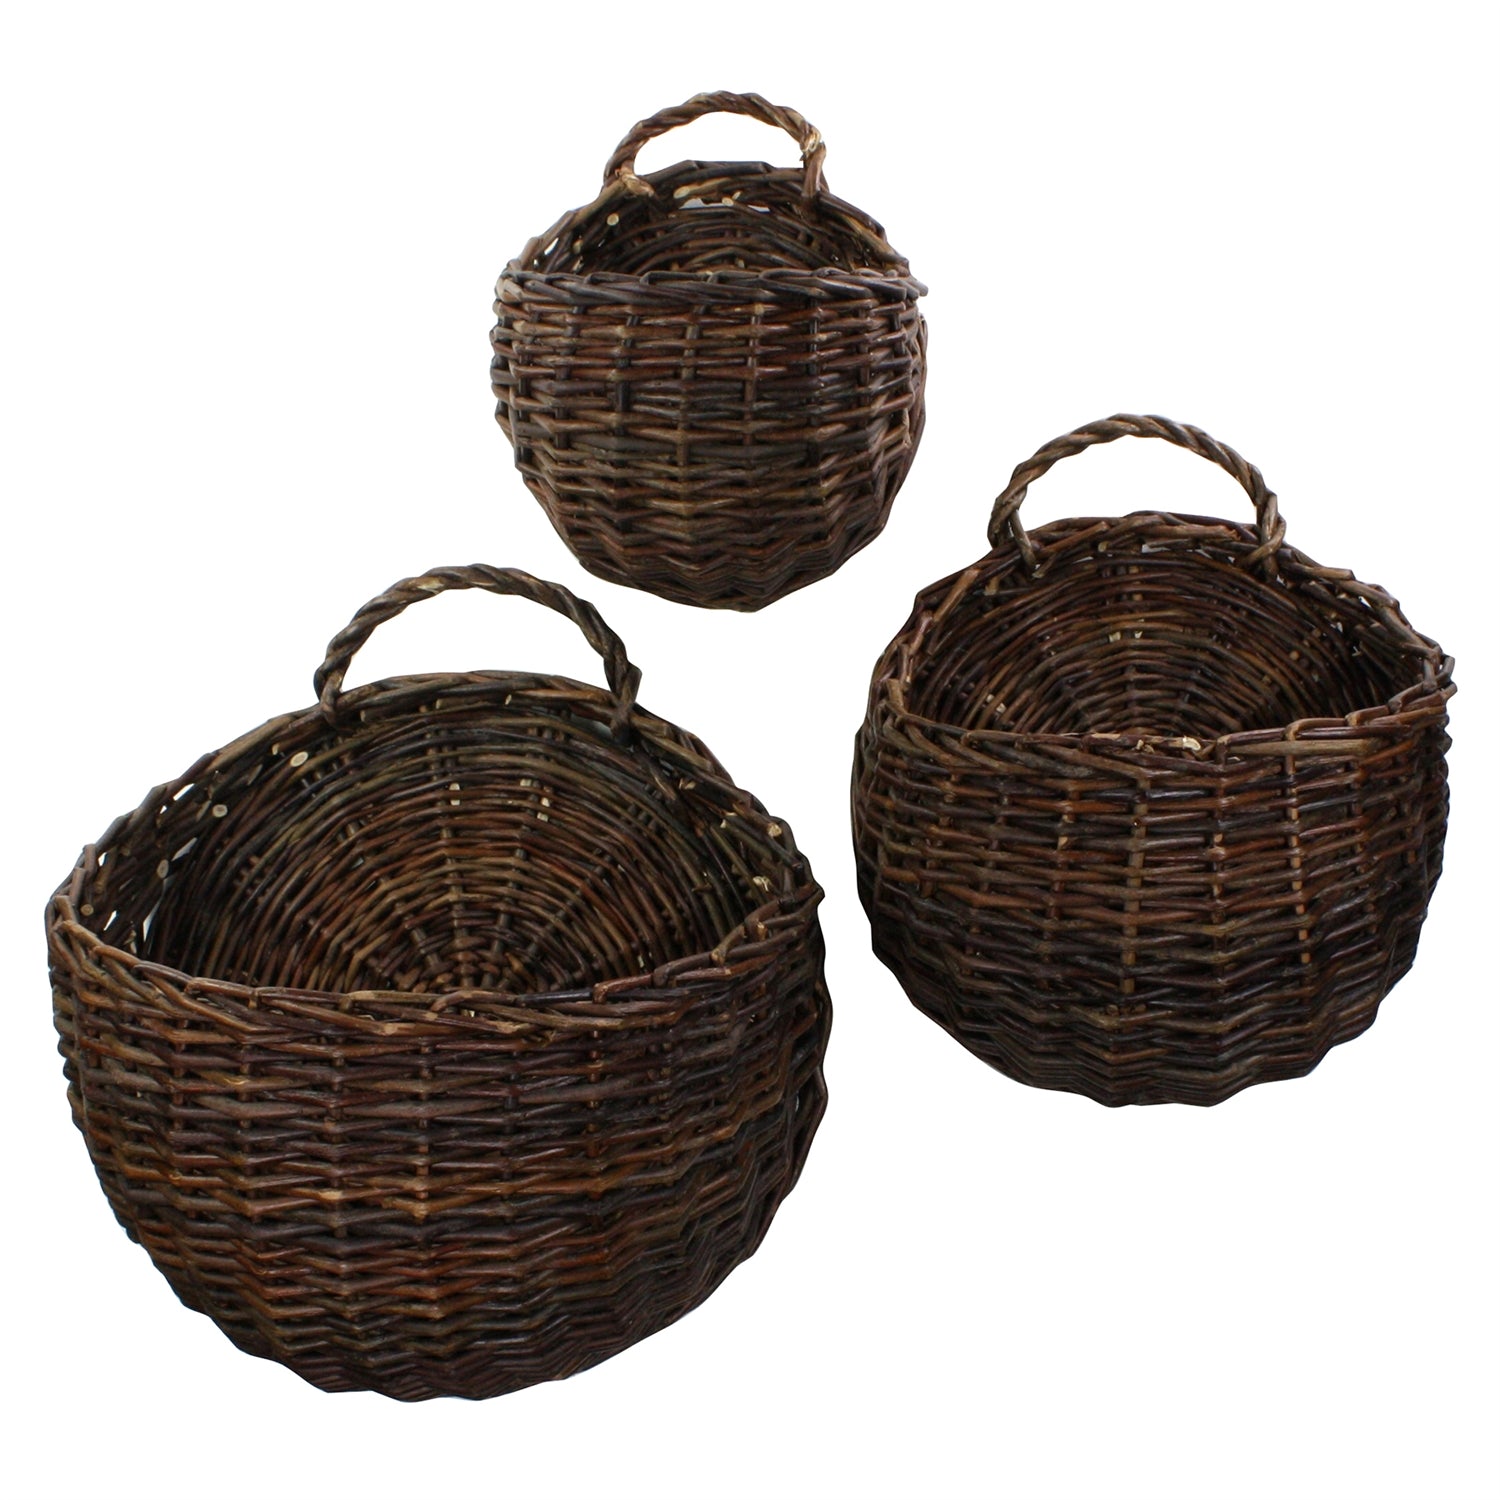 Winder Woven Willow Wall Basket, Set of 3 - Colonial House of Flowers | Atlanta